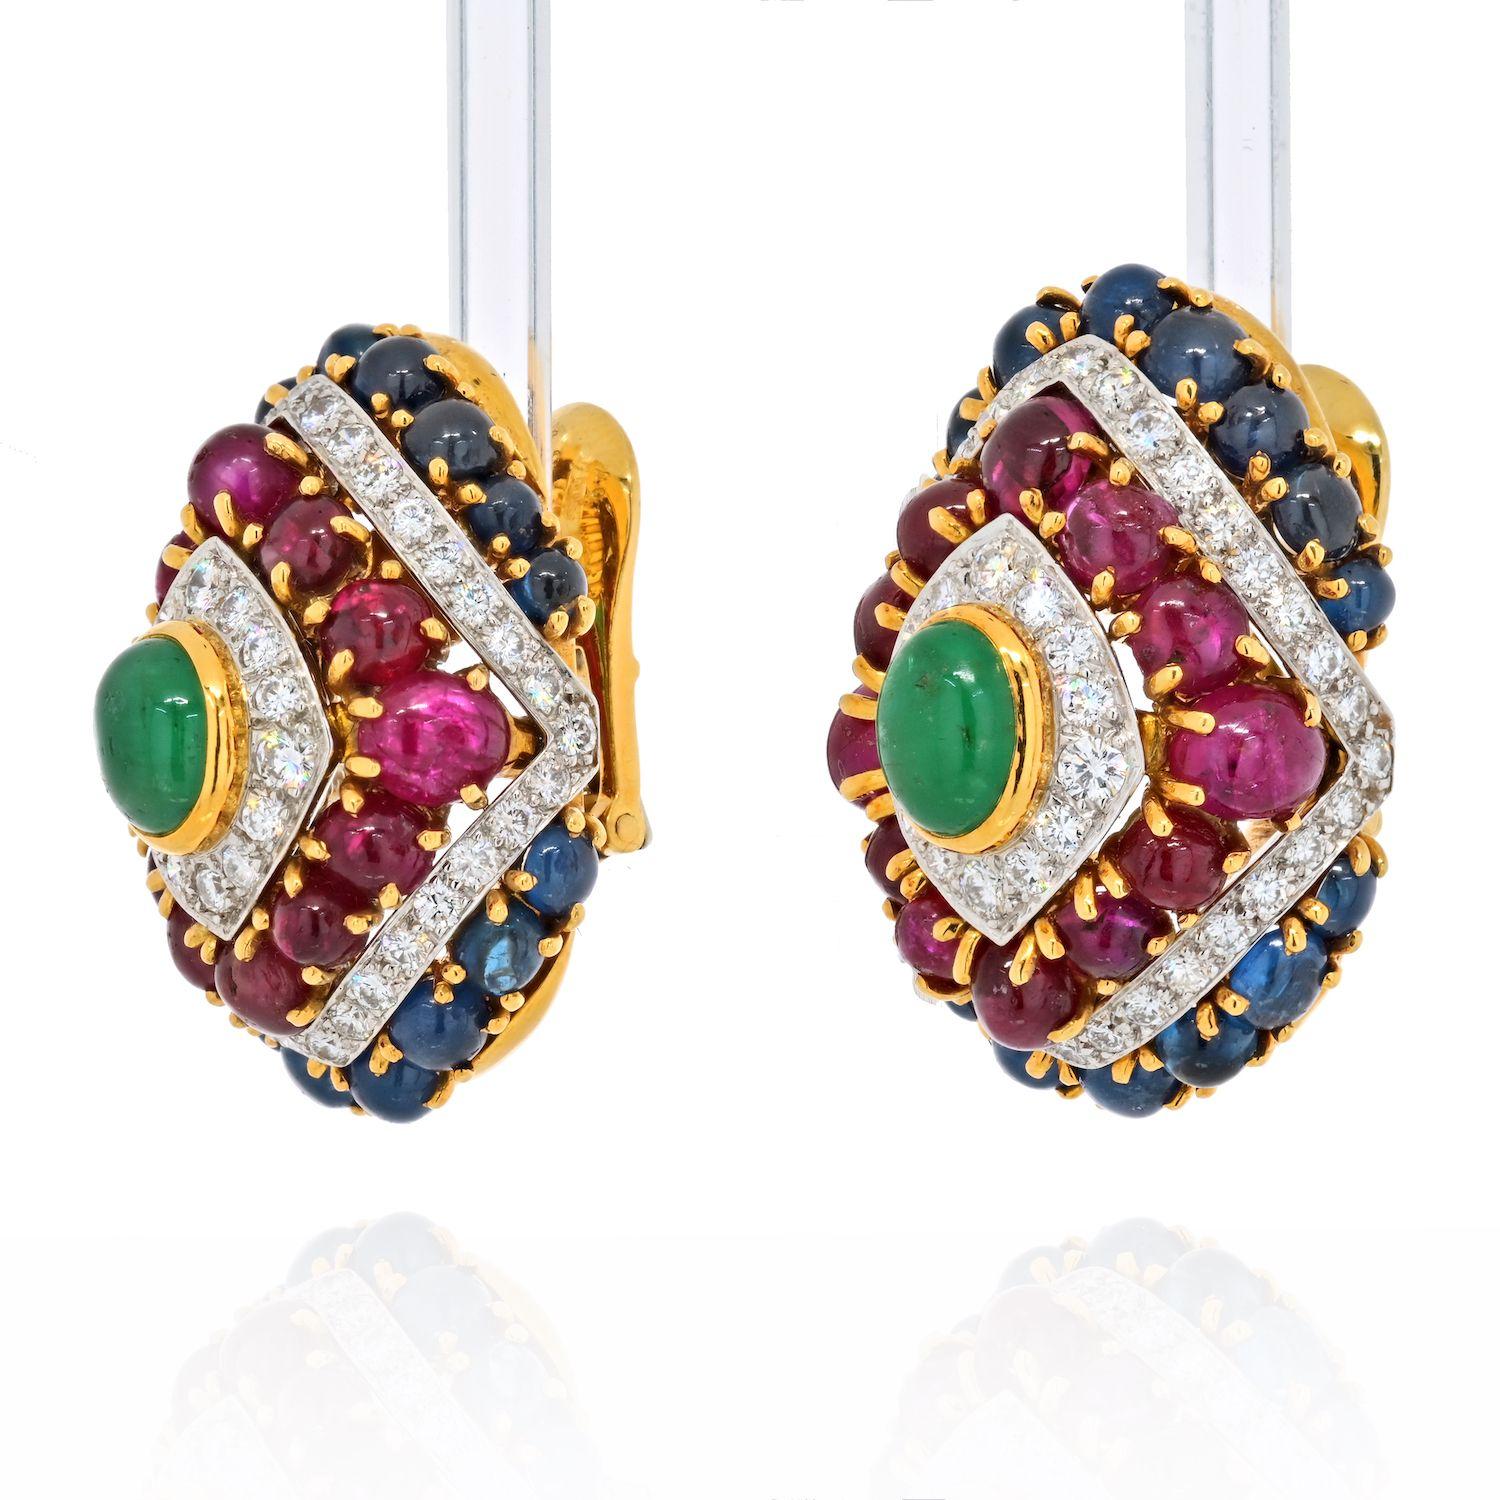 These are extraordinary earrings by David Webb mounted with color stones like rubies, sapphires and emeralds and further accented with diamonds. You cannot not see these earrings when the wearer has them on. They are absolutely spectacular!
The